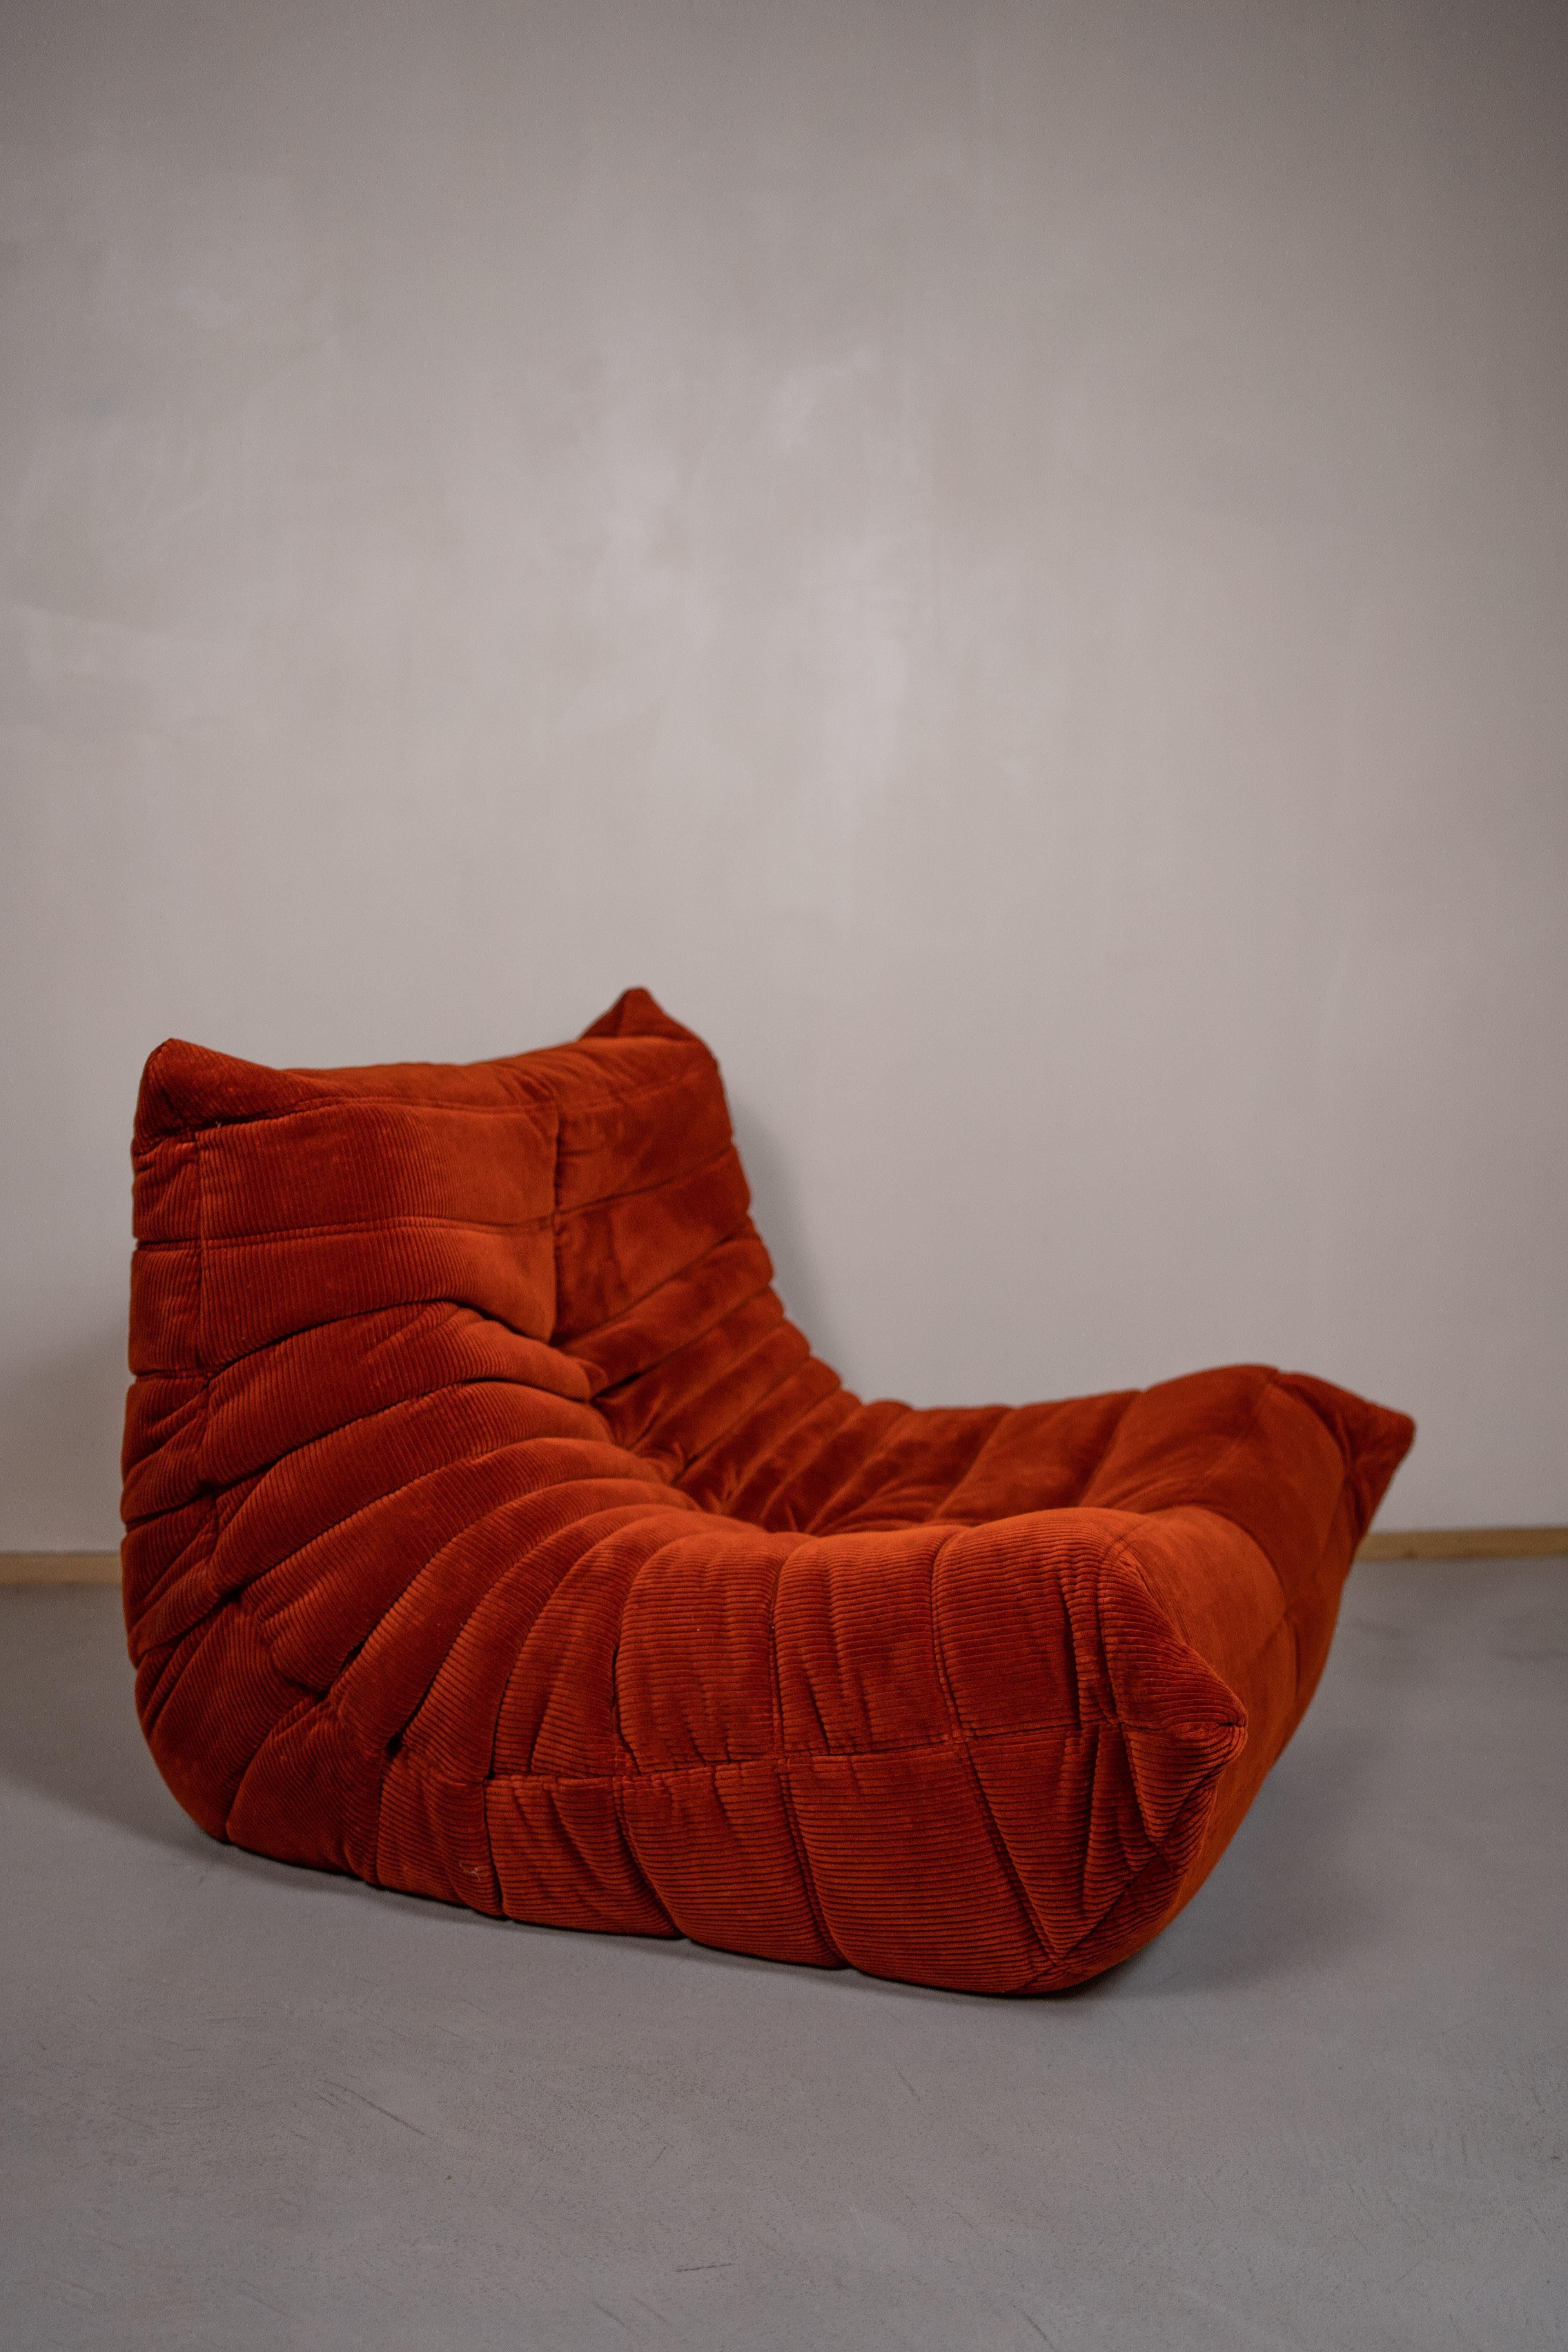 French Togo Sofa by Michel Ducaroy, 5 Pieces, for Ligne Roset